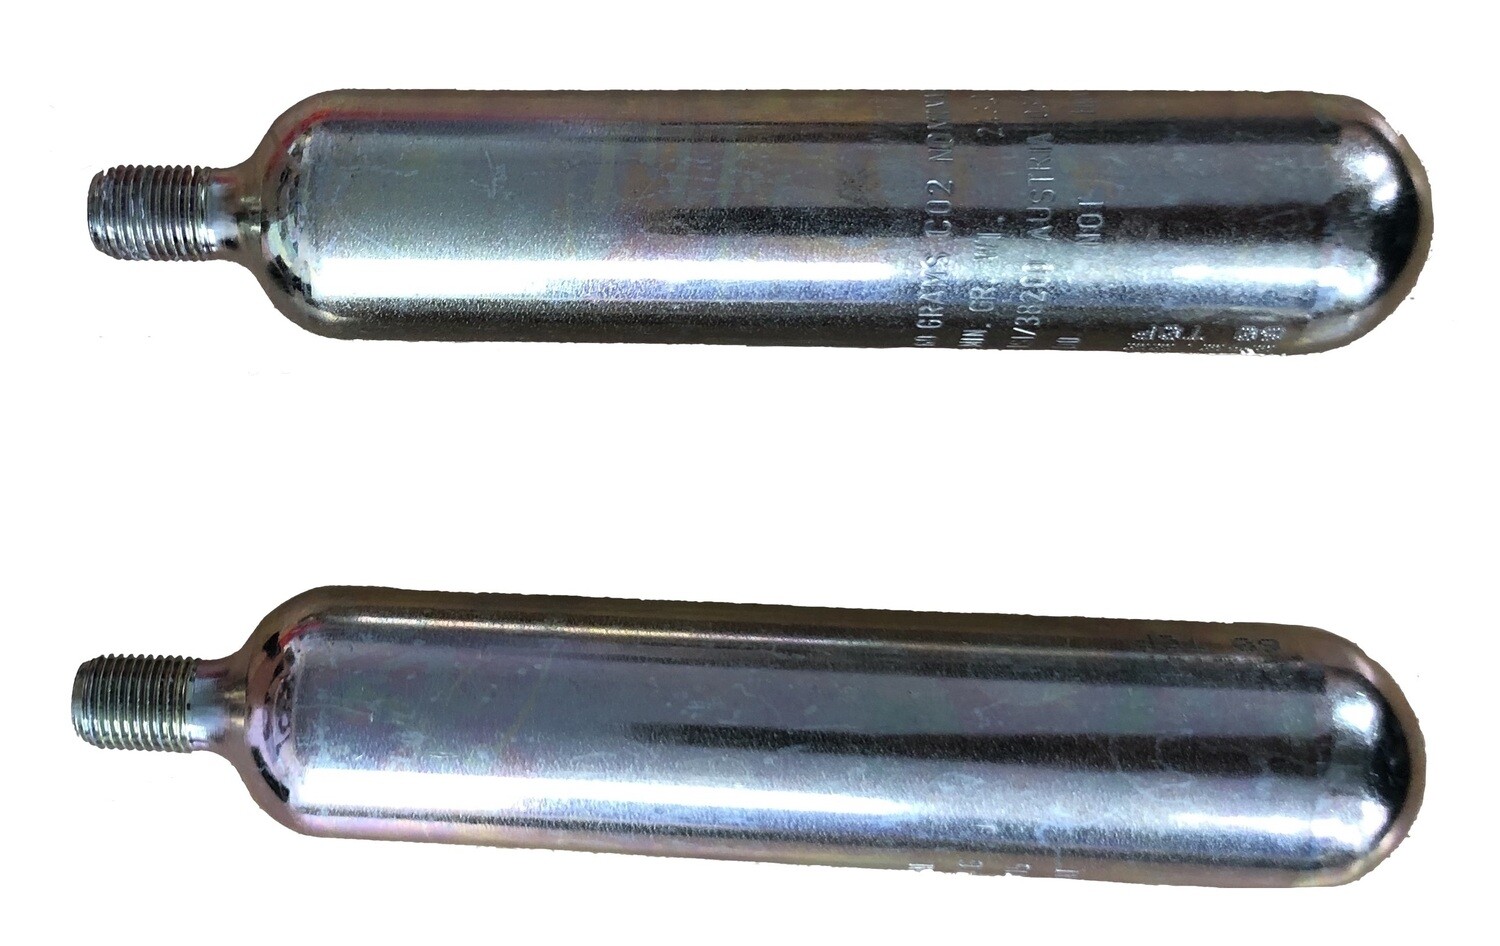 Two (2) CO2 60 gr. cylinders with sens07tube - International shipping